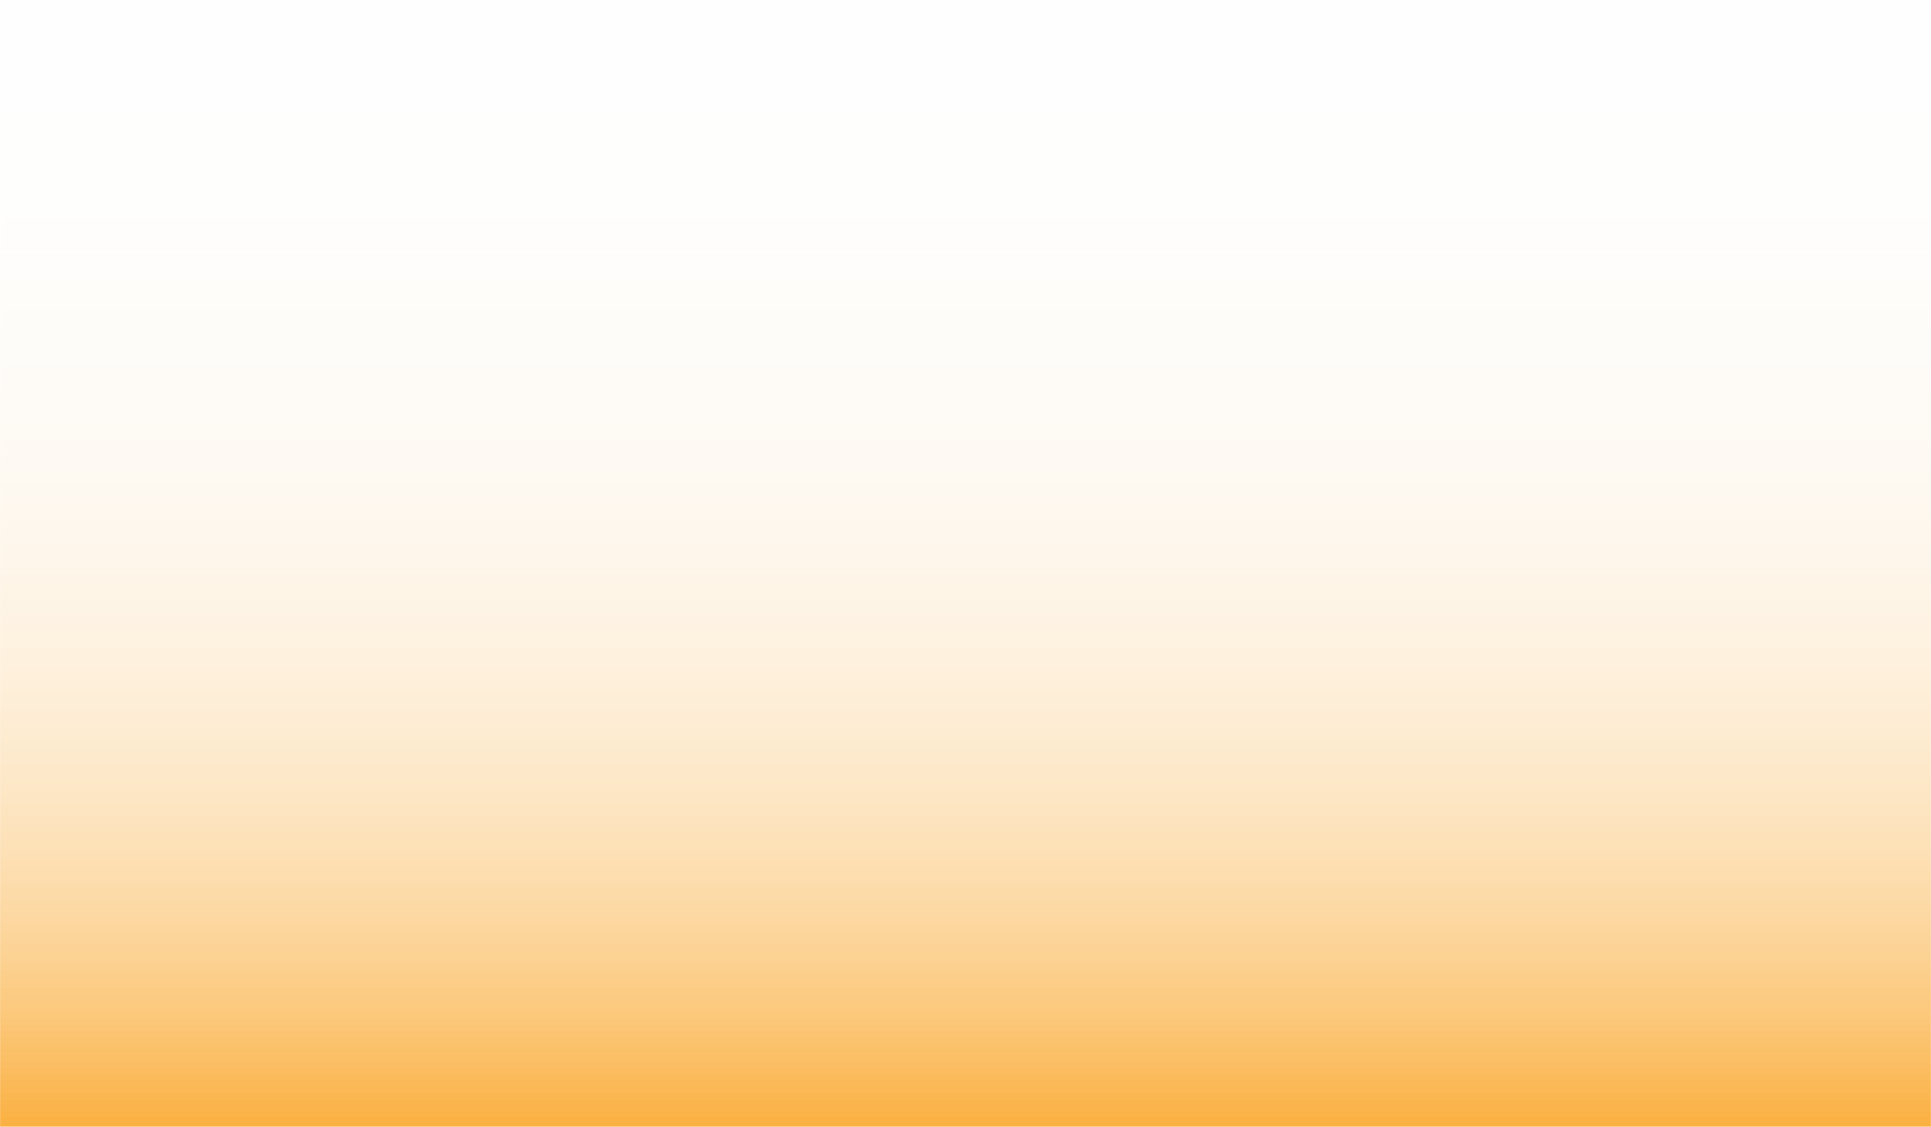 Orange Gradient That Fades To Transparency